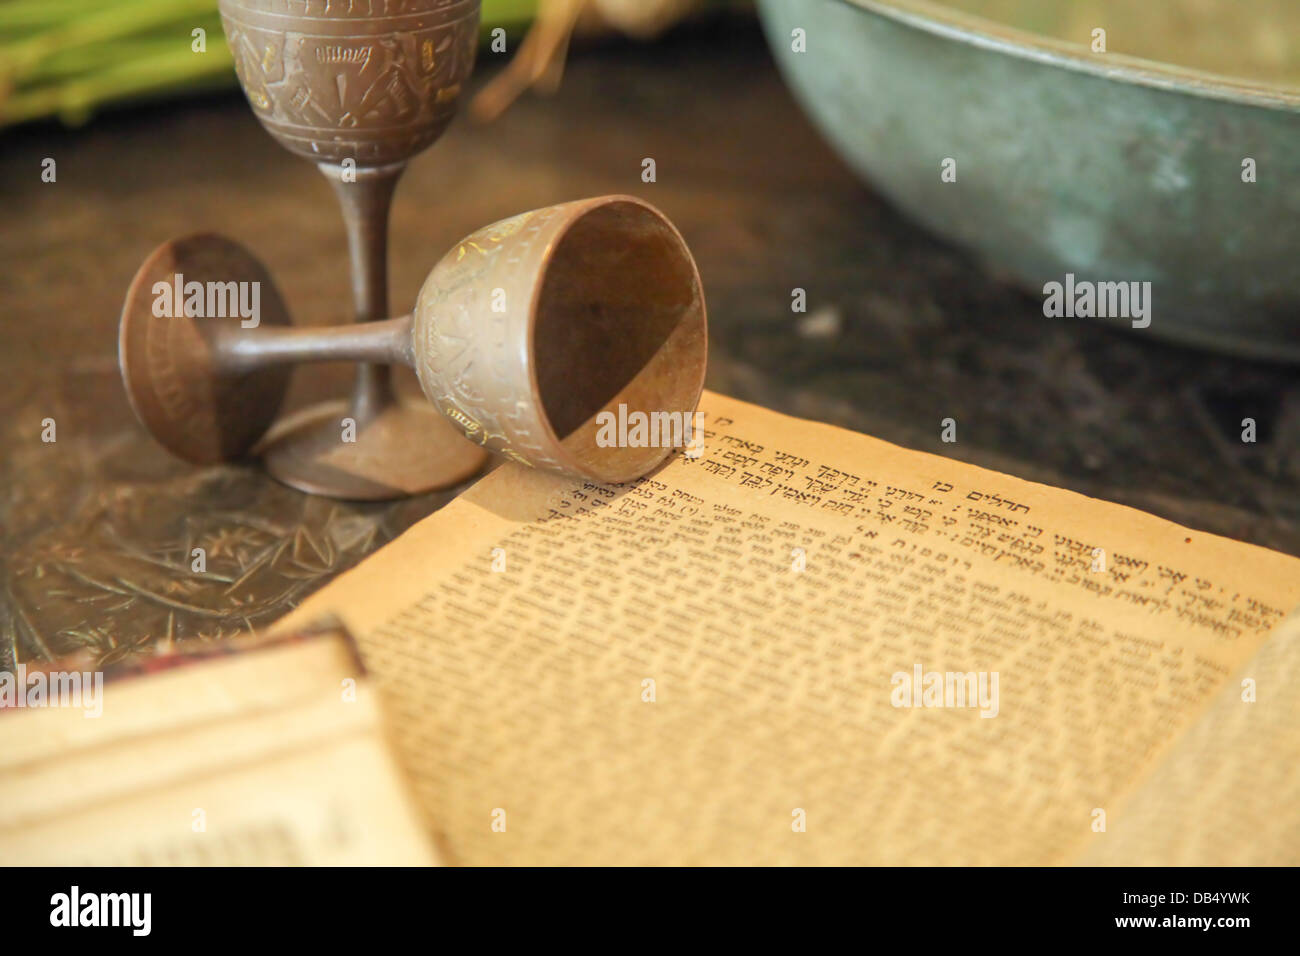 Ancient Kiddush cup and Tehilim (Psalms) book, at the Babylonian Jewry heritage center Stock Photo